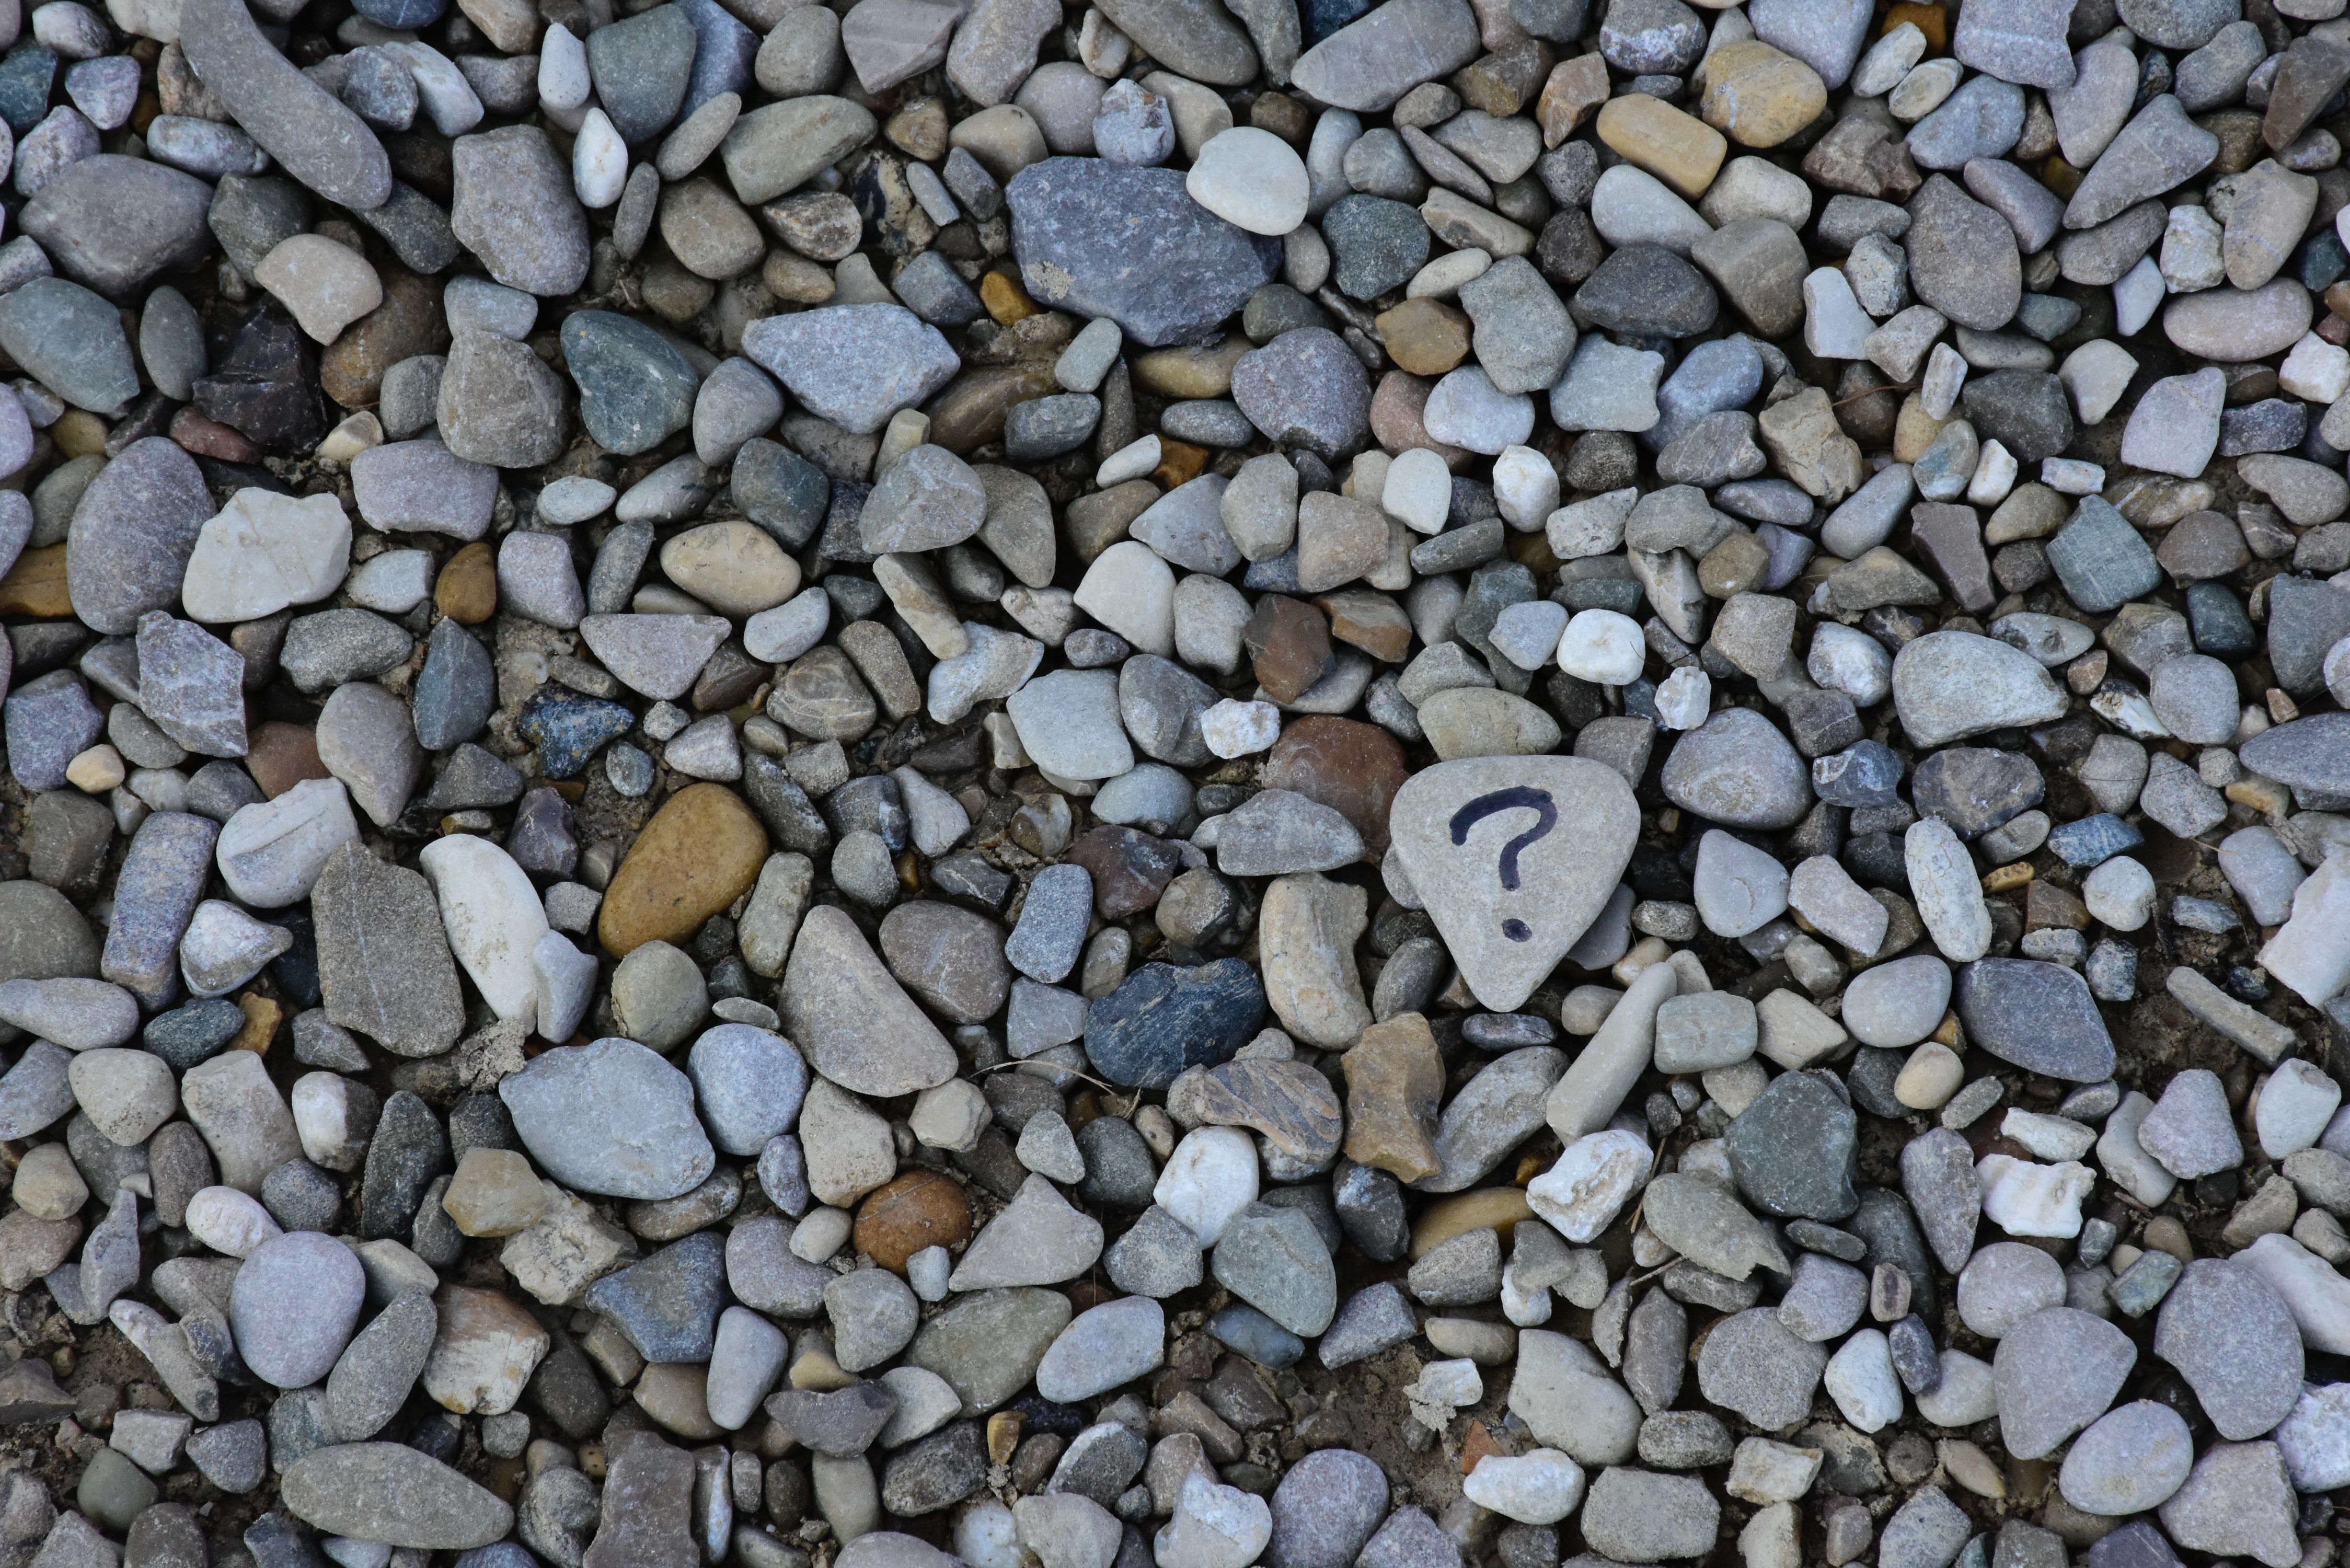 Close-up image of rocks and a question mark 